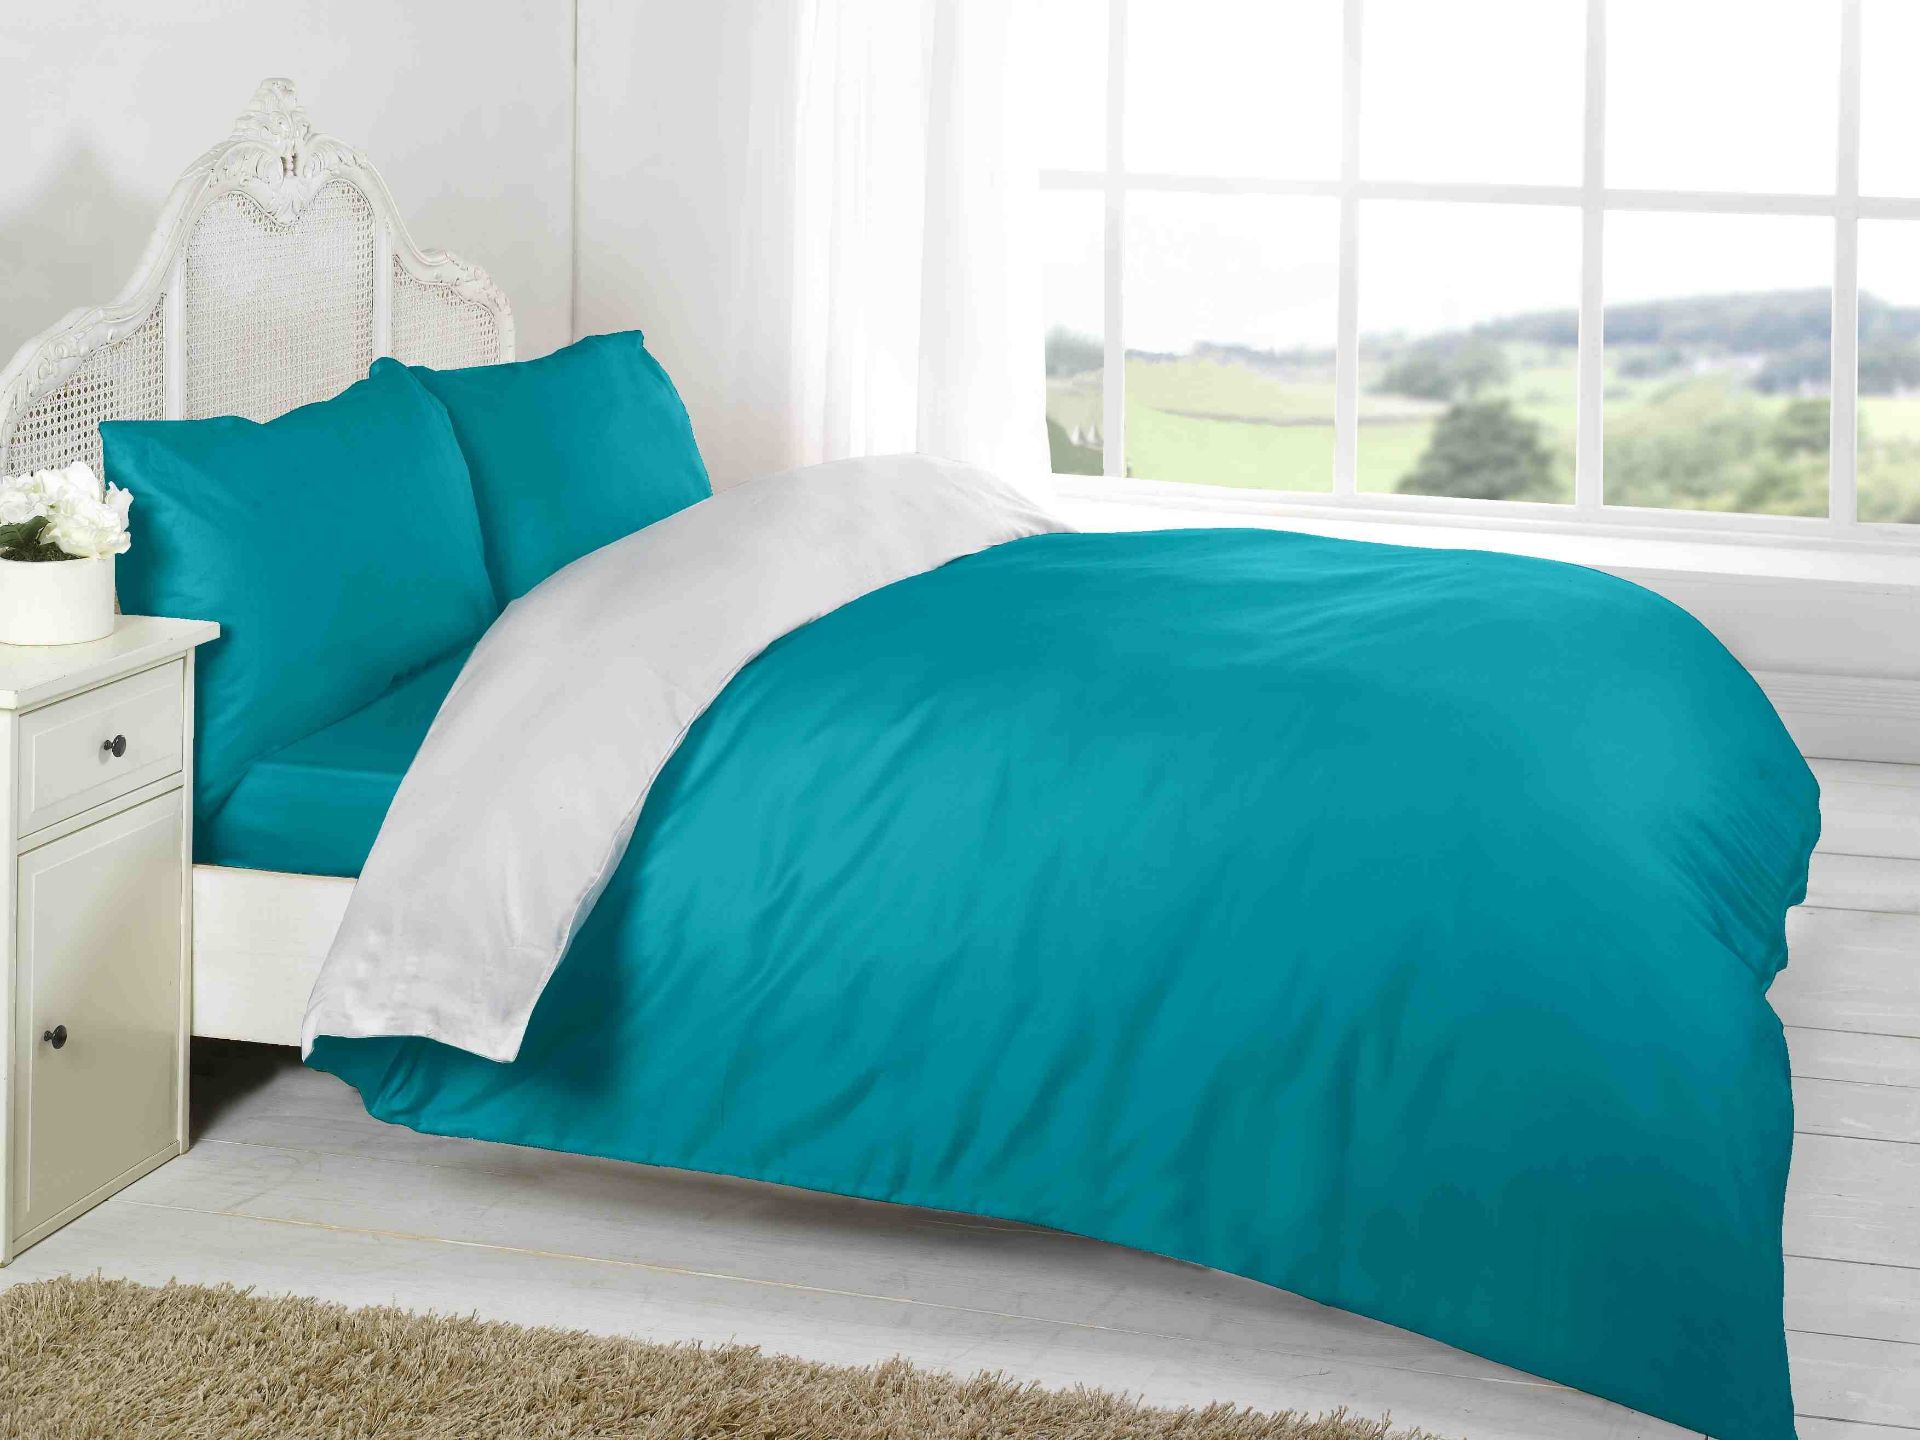 V Brand New Double Complete Reversible Bed Set Includes 1 x Duvet Cover - 1 x Fitted Sheet - 2 x